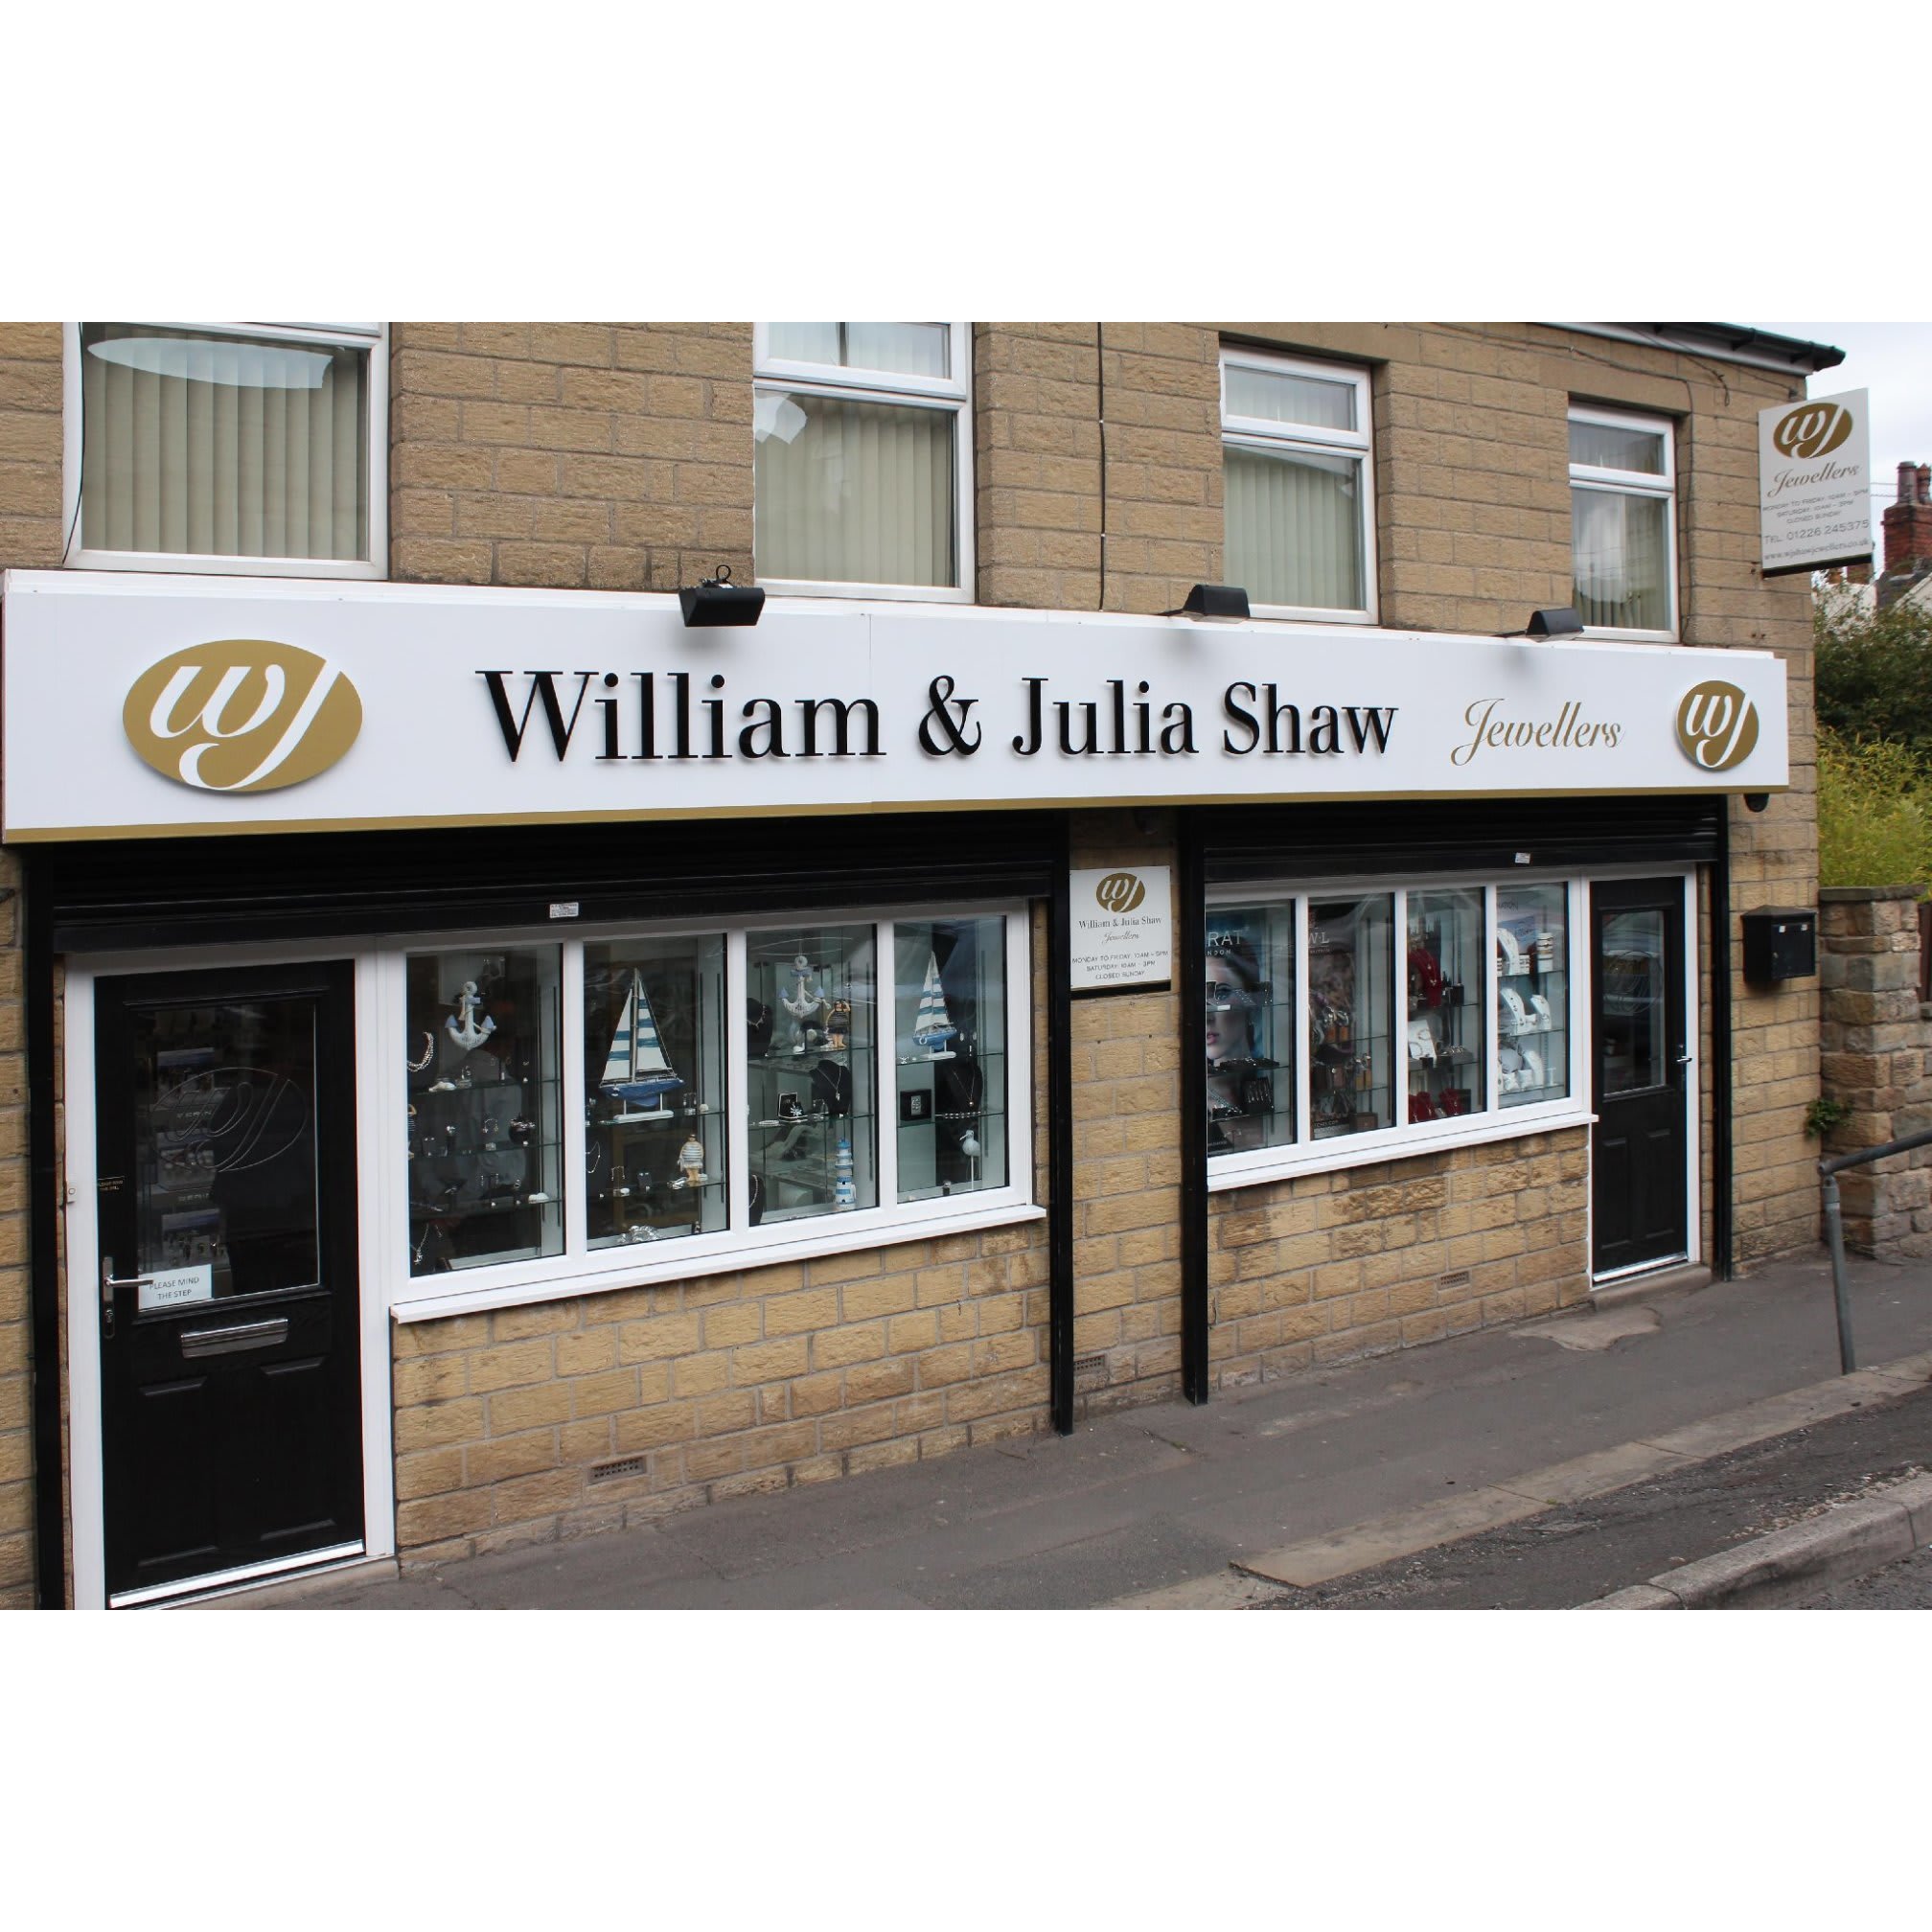 William & Julia Shaw Jewellers - Barnsley, South Yorkshire S75 3RG - 01226 245375 | ShowMeLocal.com